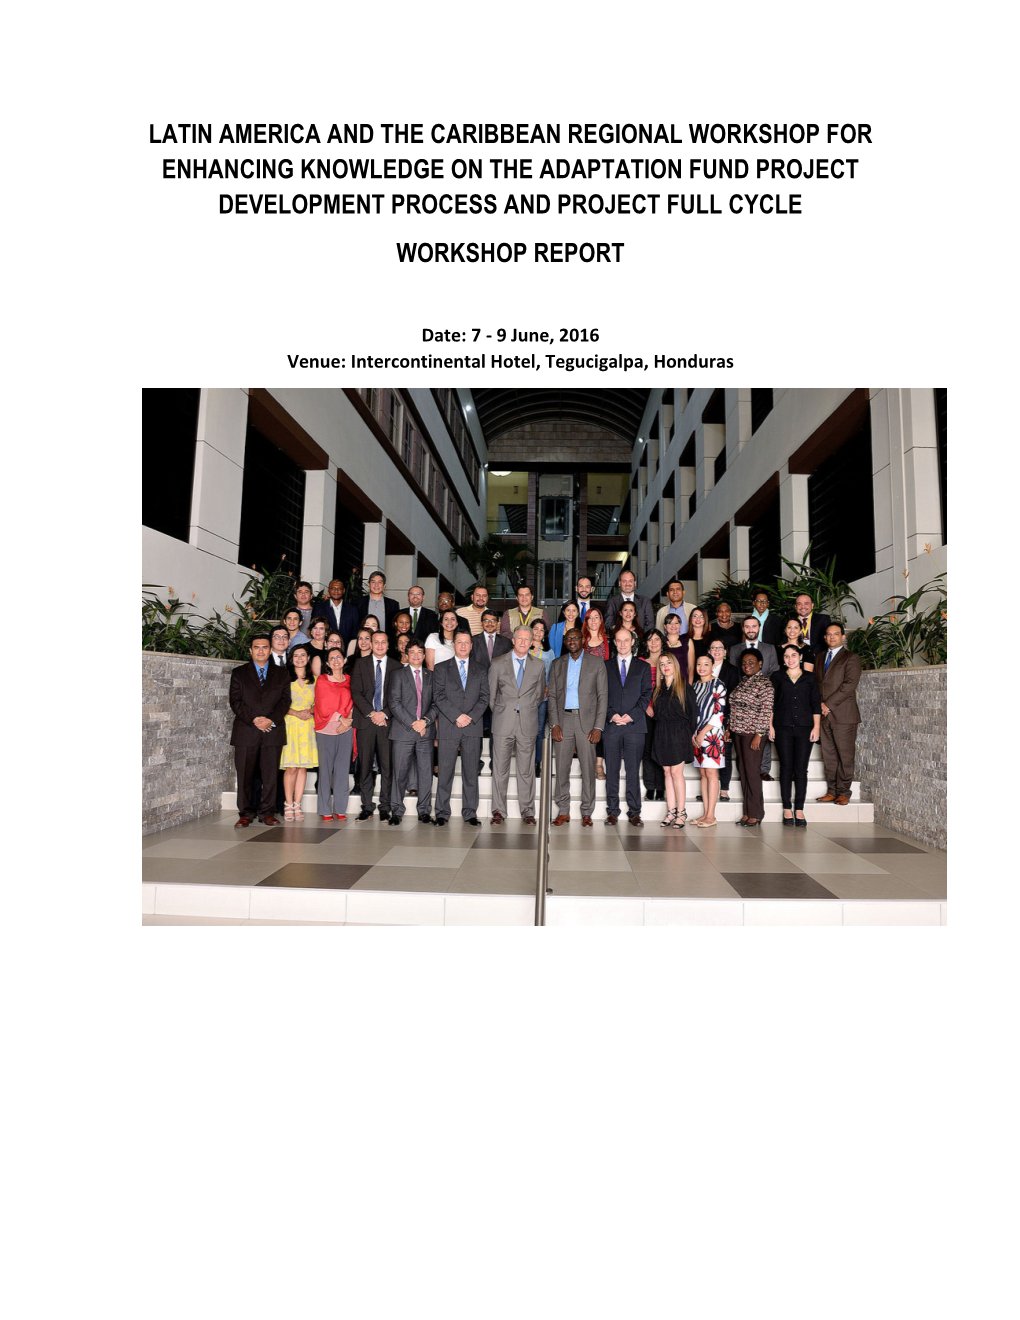 Latin America and the Caribbean Regional Workshop for Enhancing Knowledge on the Adaptation Fund Project Development Process and Project Full Cycle Workshop Report